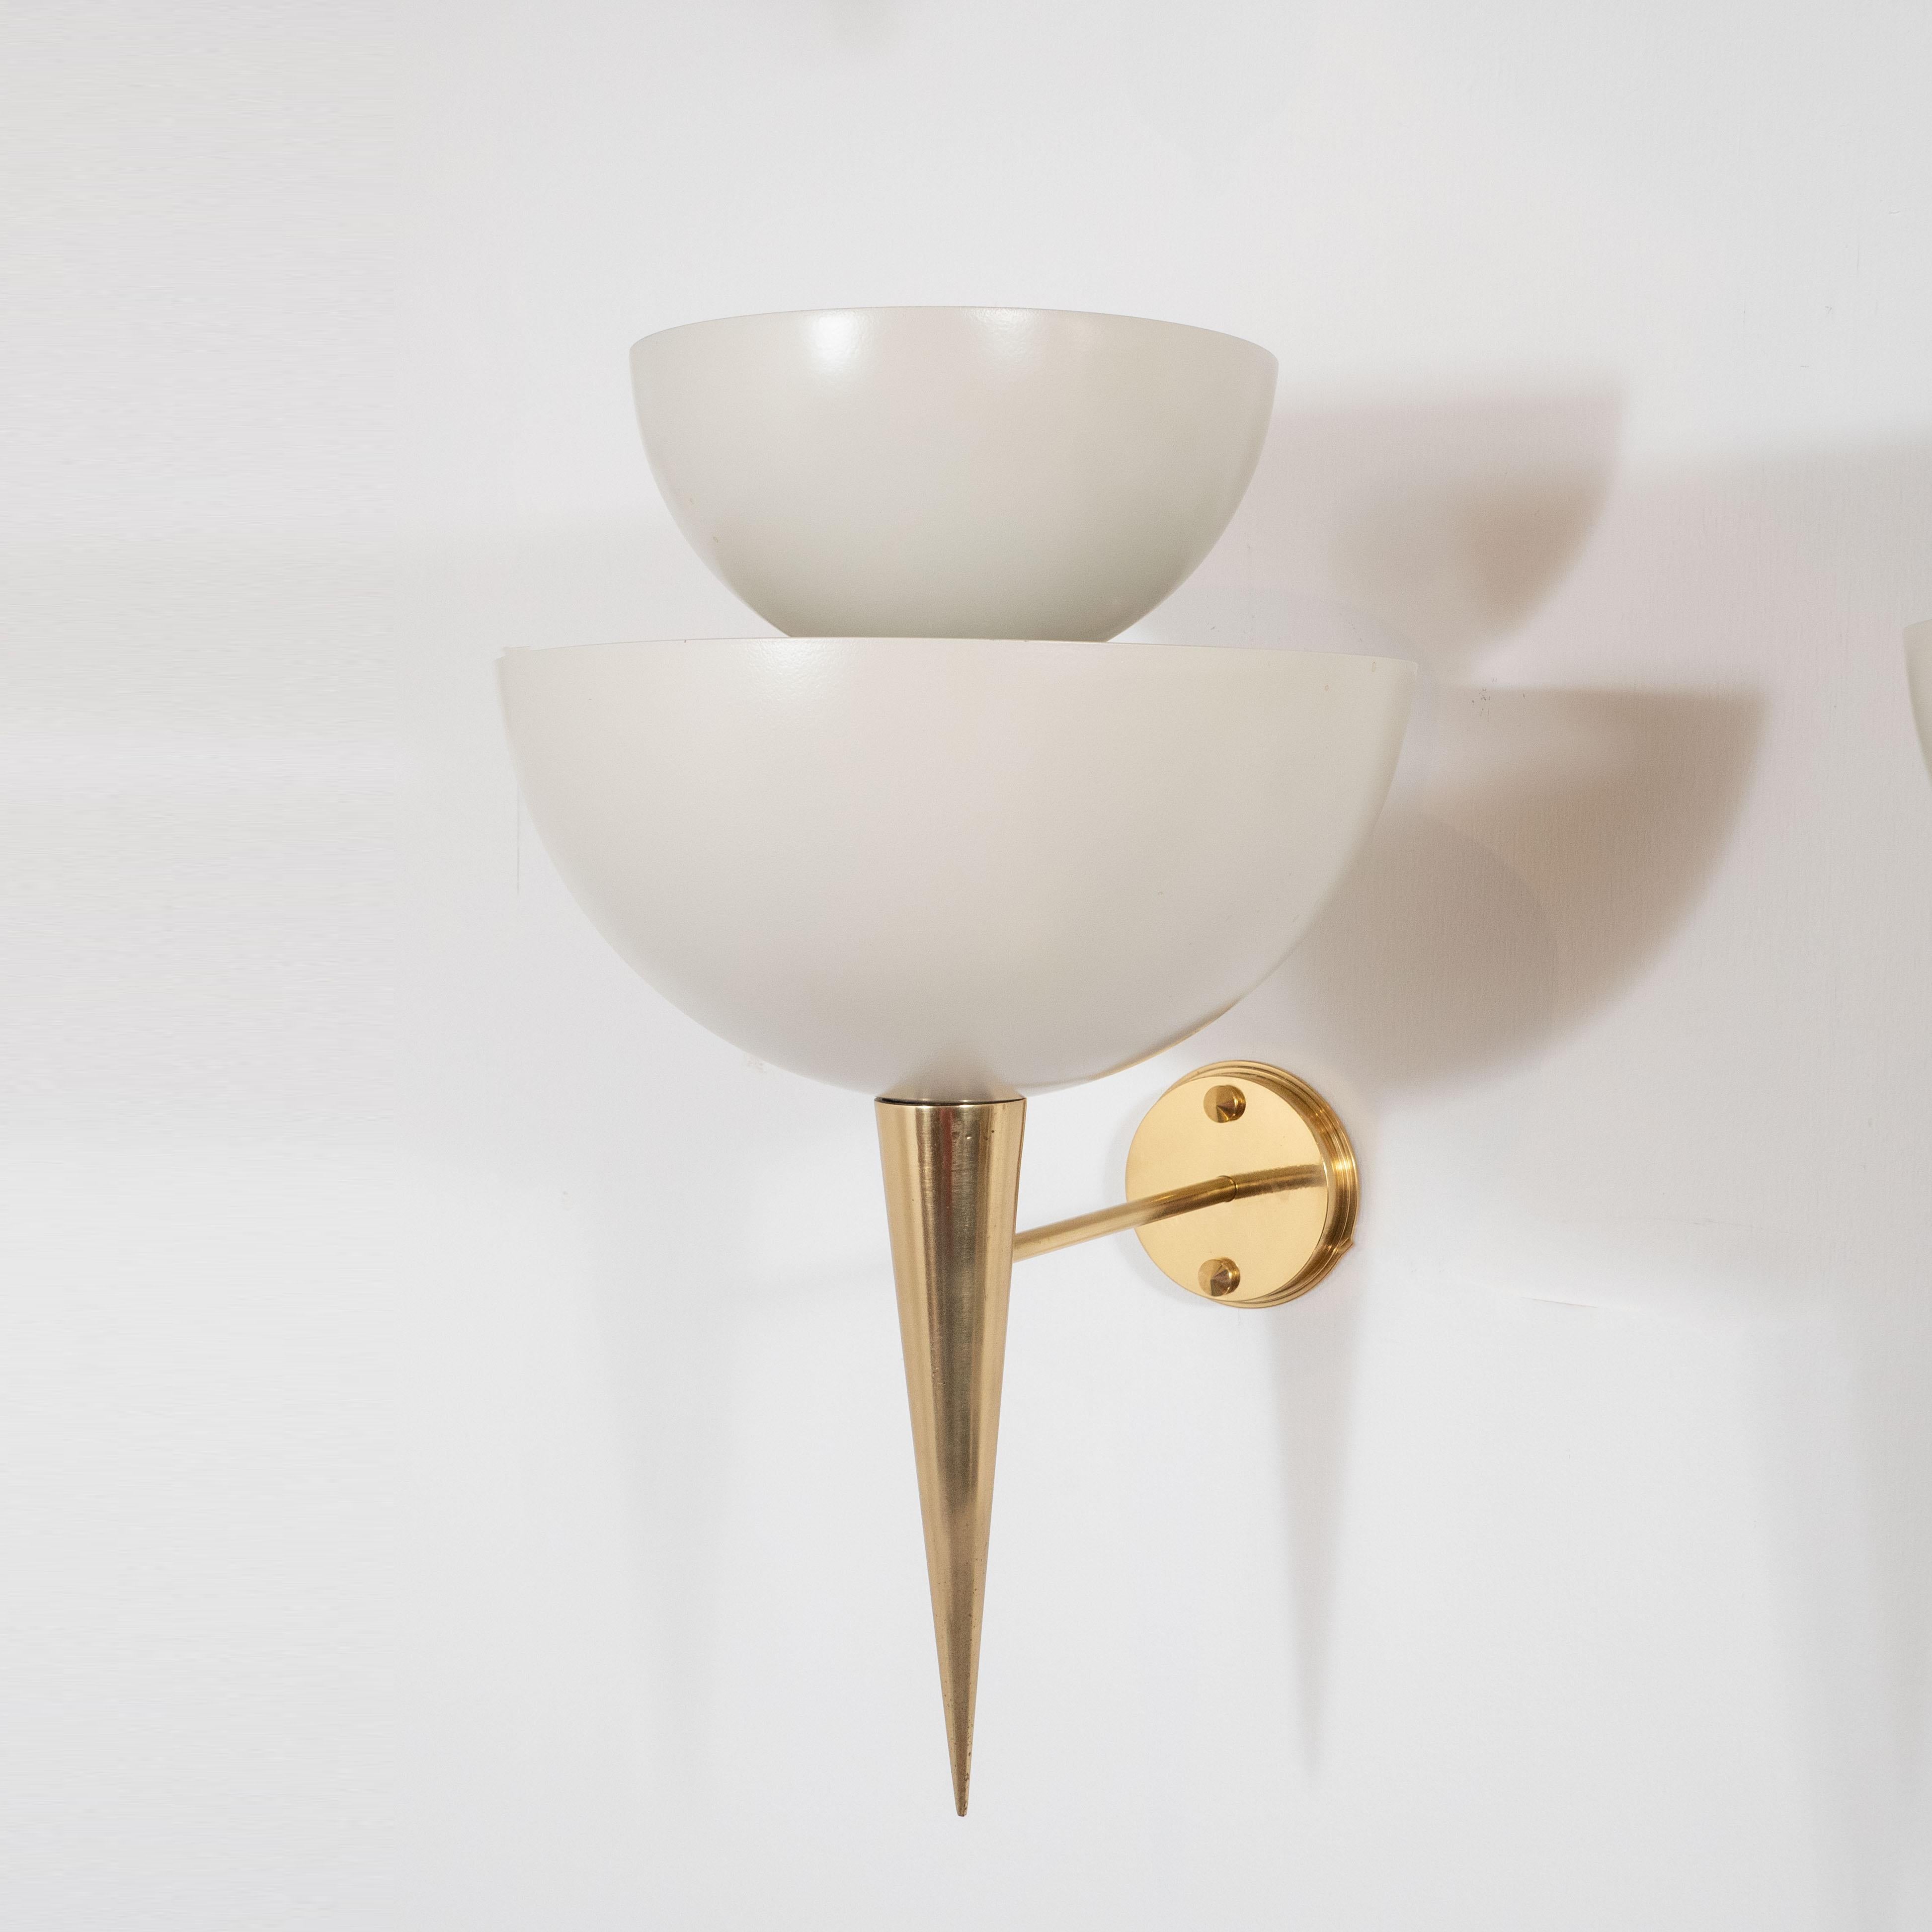 Inspired by Mid-Century Modern design, this pair Italian-made wall sconce consists of two tiers of soft white powder-coated metal cups that sit atop a polished brass pointed finial, sconce is attached to a brass wall plate. The natural brass will